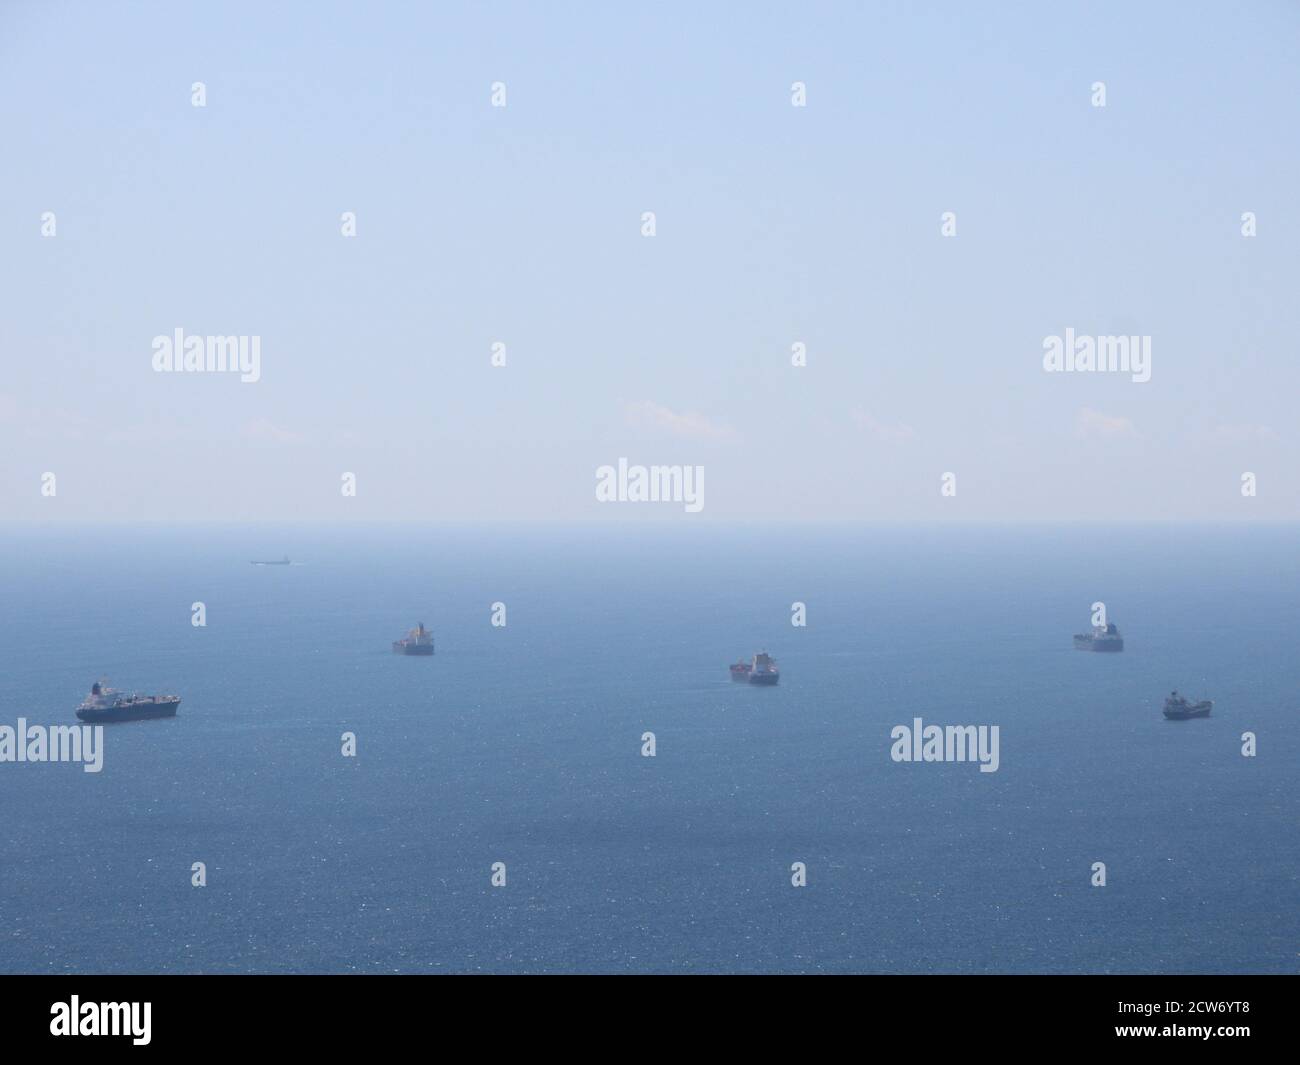 Five industrial container ships waiting at open sea. The ocean is blue and the horizon looks foggy. Stock Photo